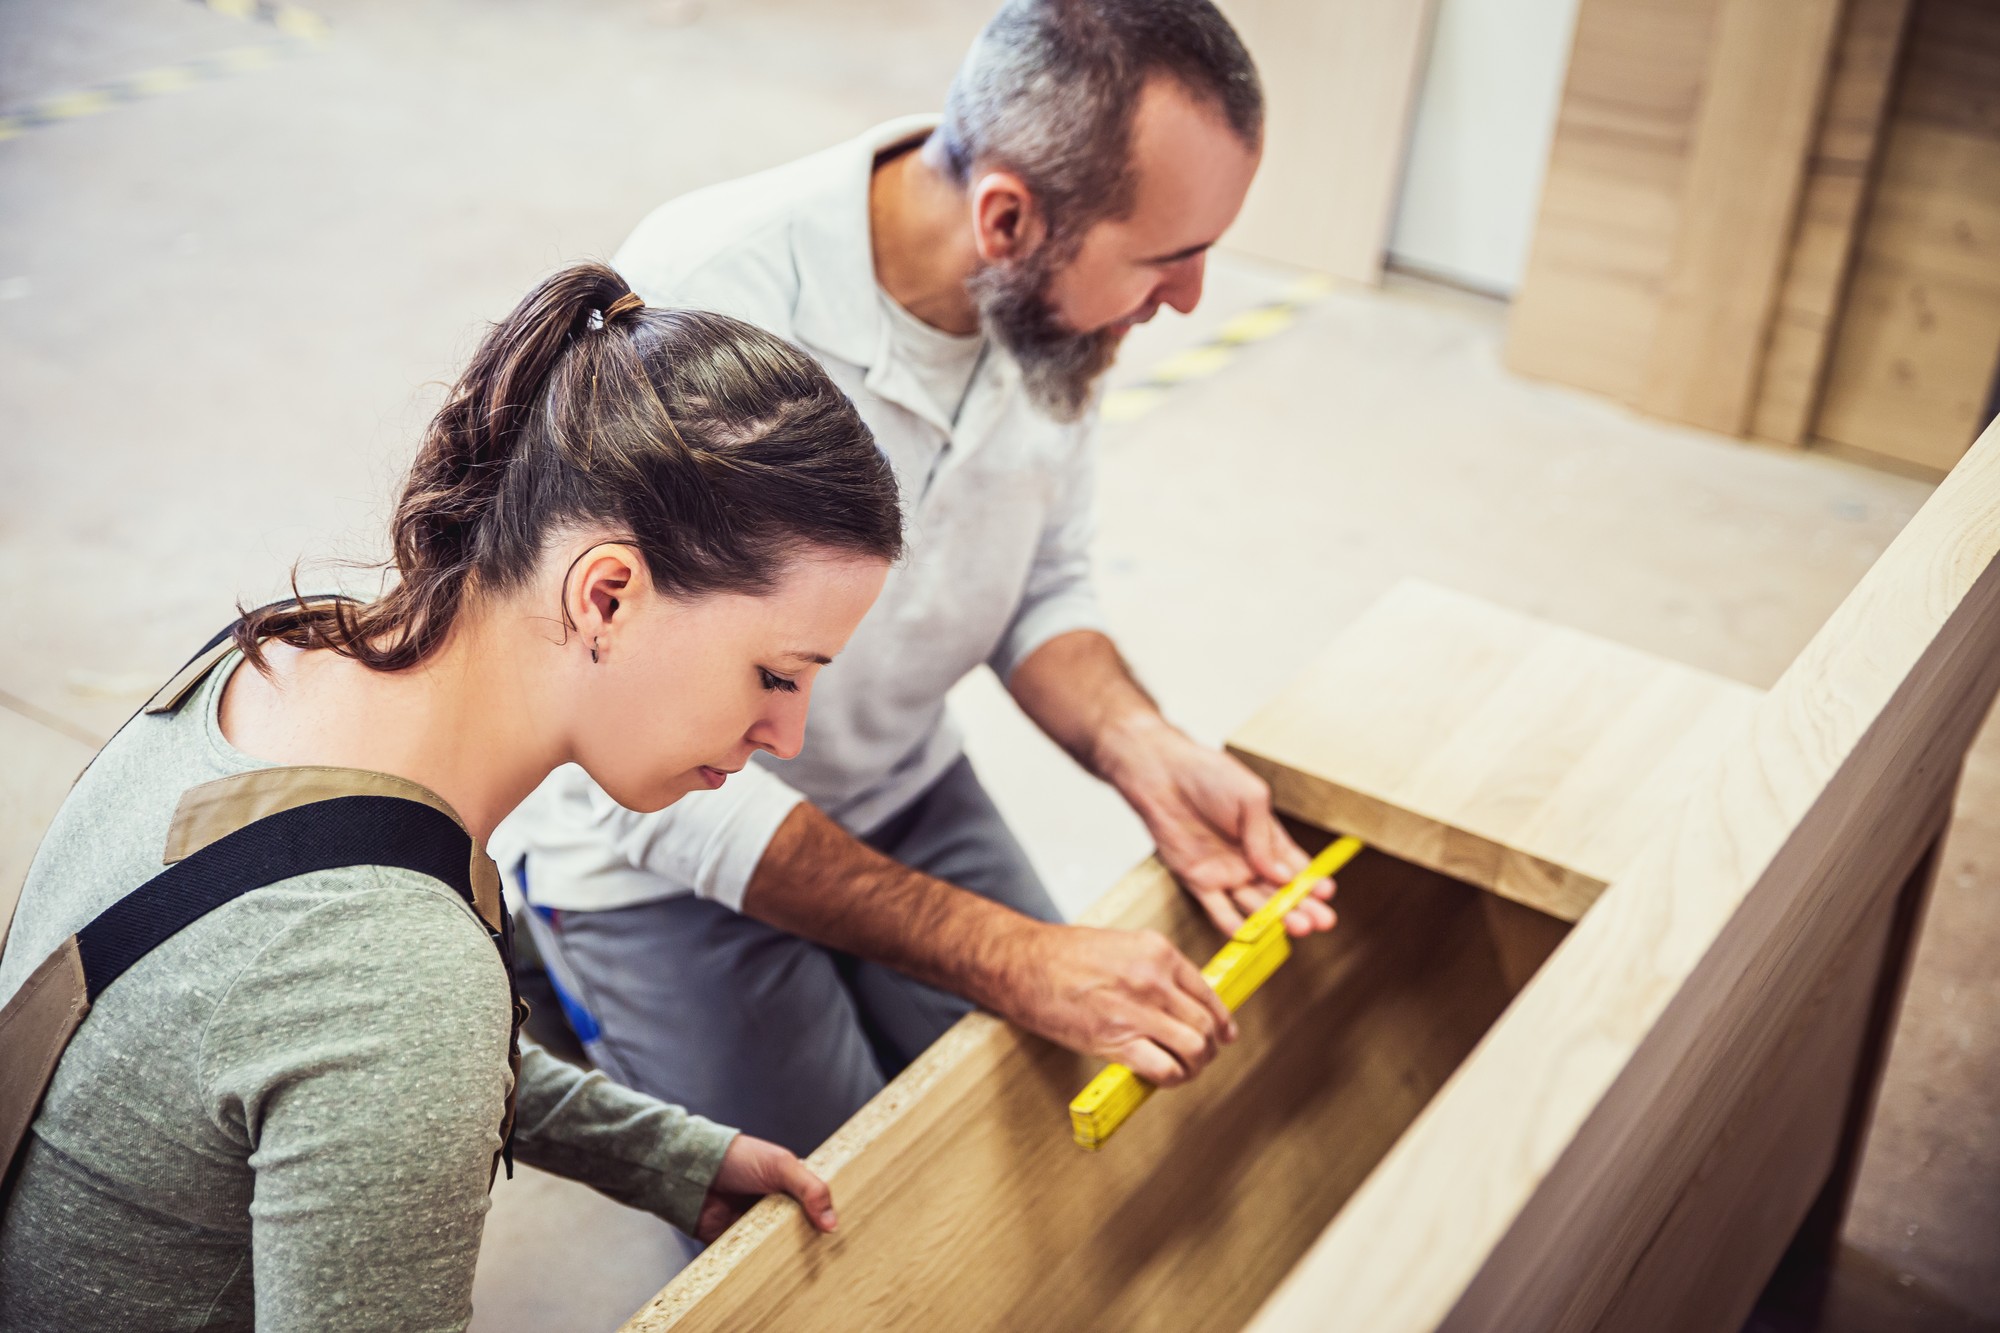 male and female carpenter at work, man and woman are crafting with wood in a workshop